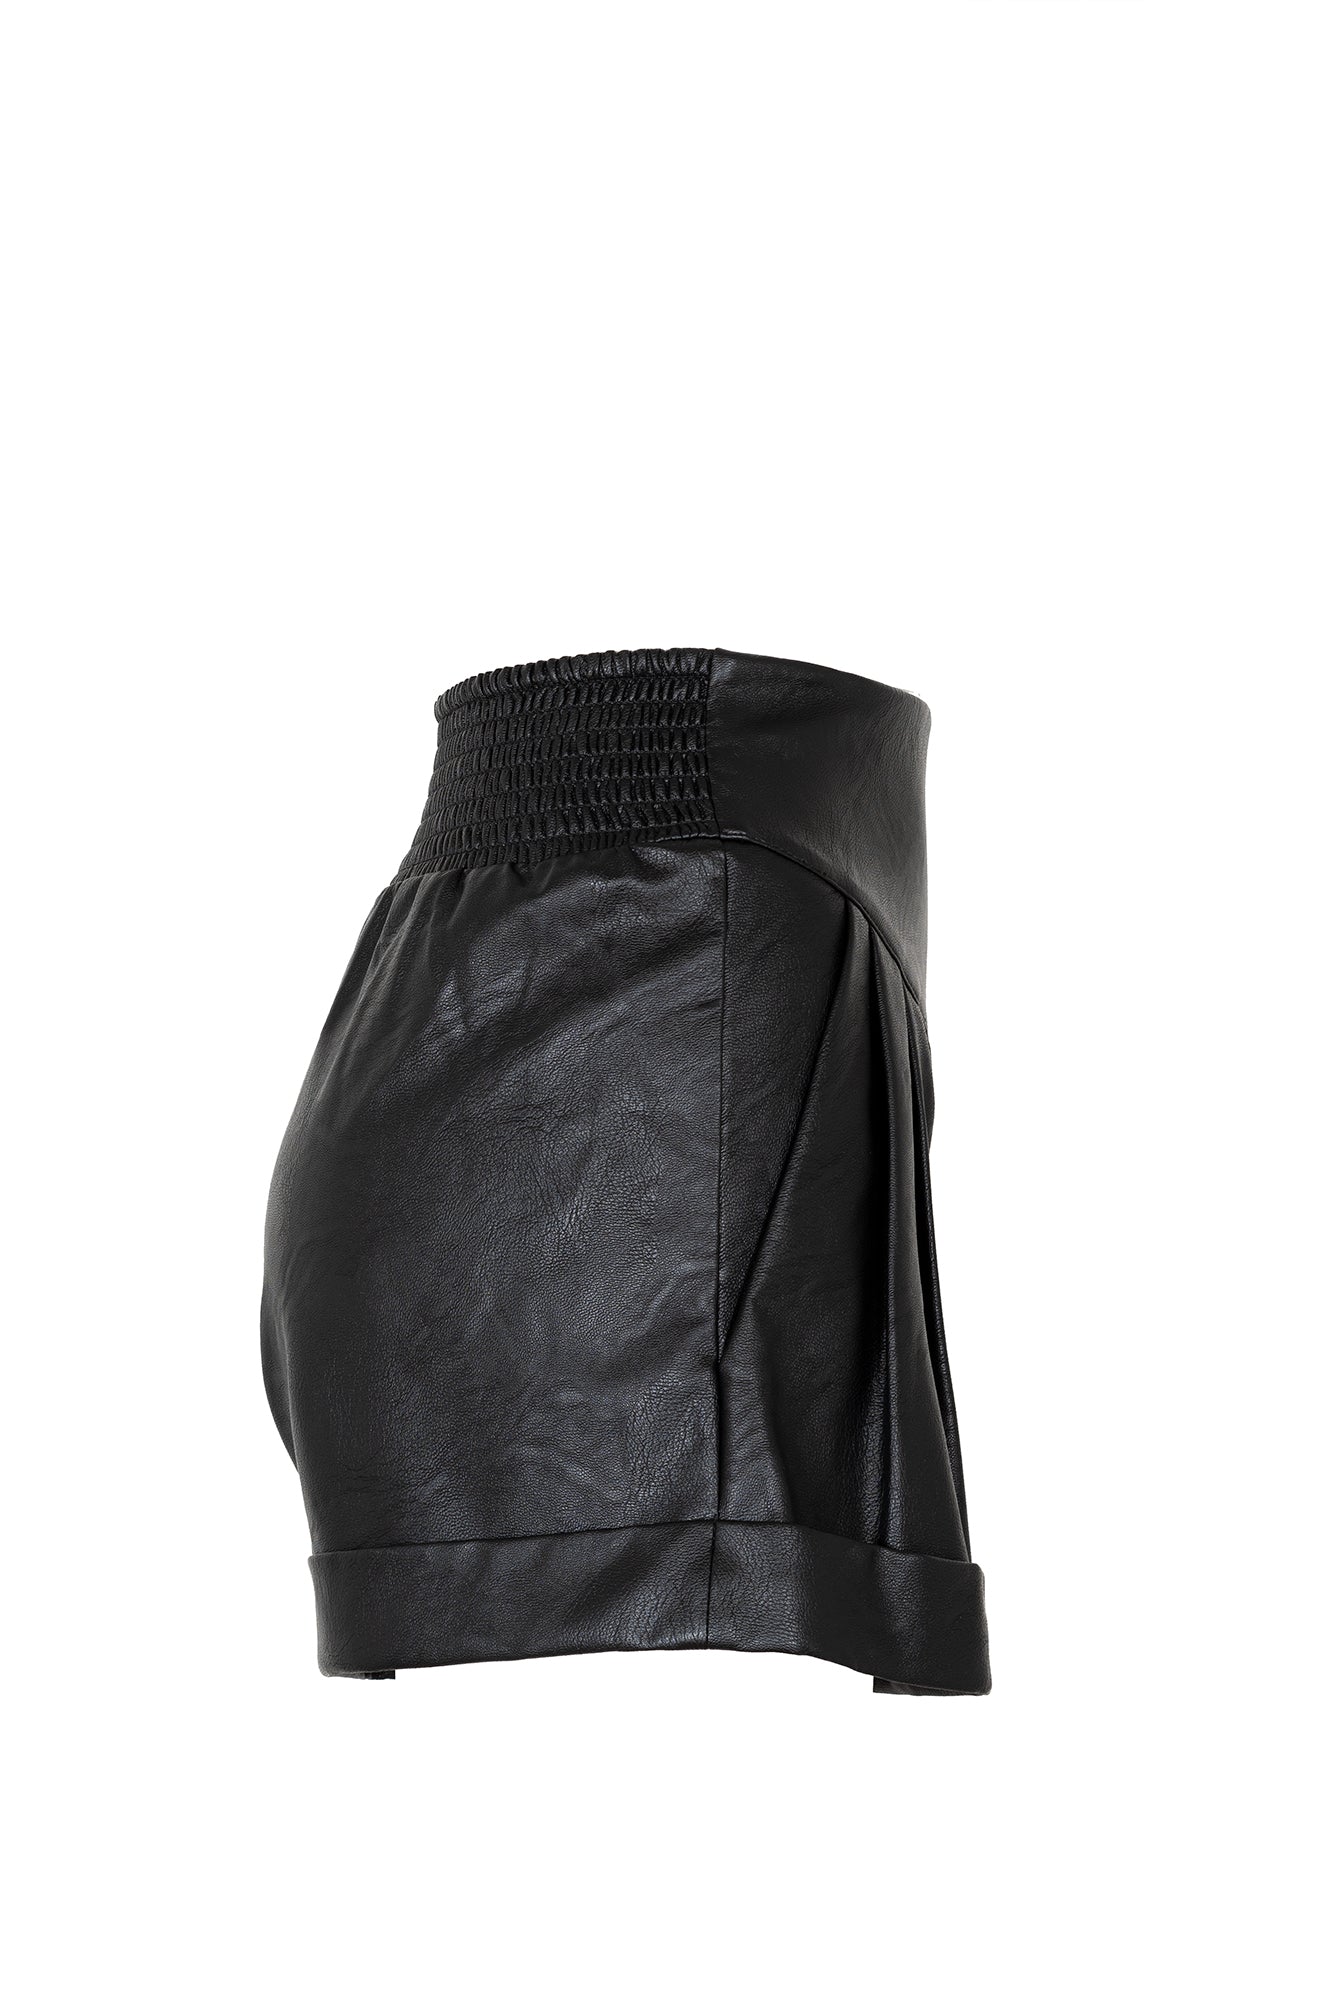 Black faux leather shorts with darts